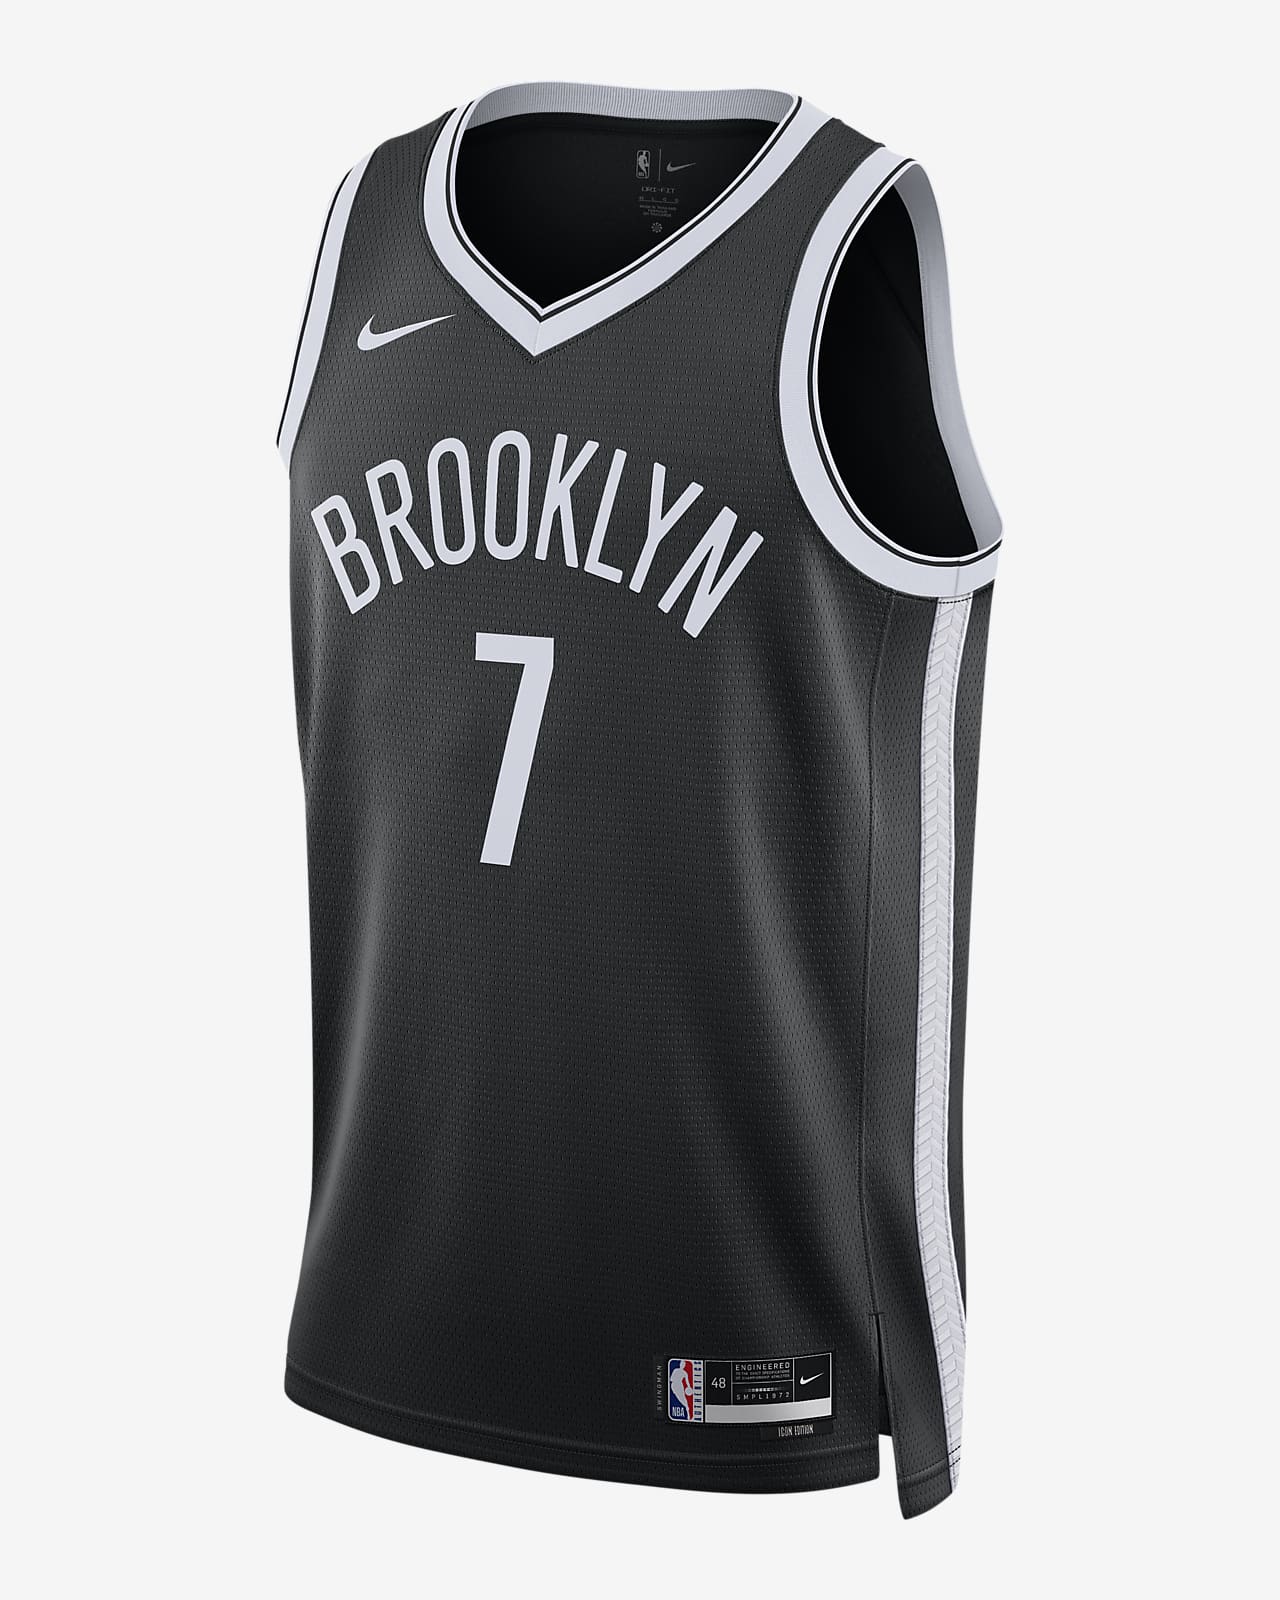 https://static.nike.com/a/images/t_PDP_1280_v1/f_auto,q_auto:eco/4e669a35-c37a-420a-ac99-ac2a671f1c03/brooklyn-nets-icon-edition-2022-23-dri-fit-nba-swingman-jersey-DdRLCX.png